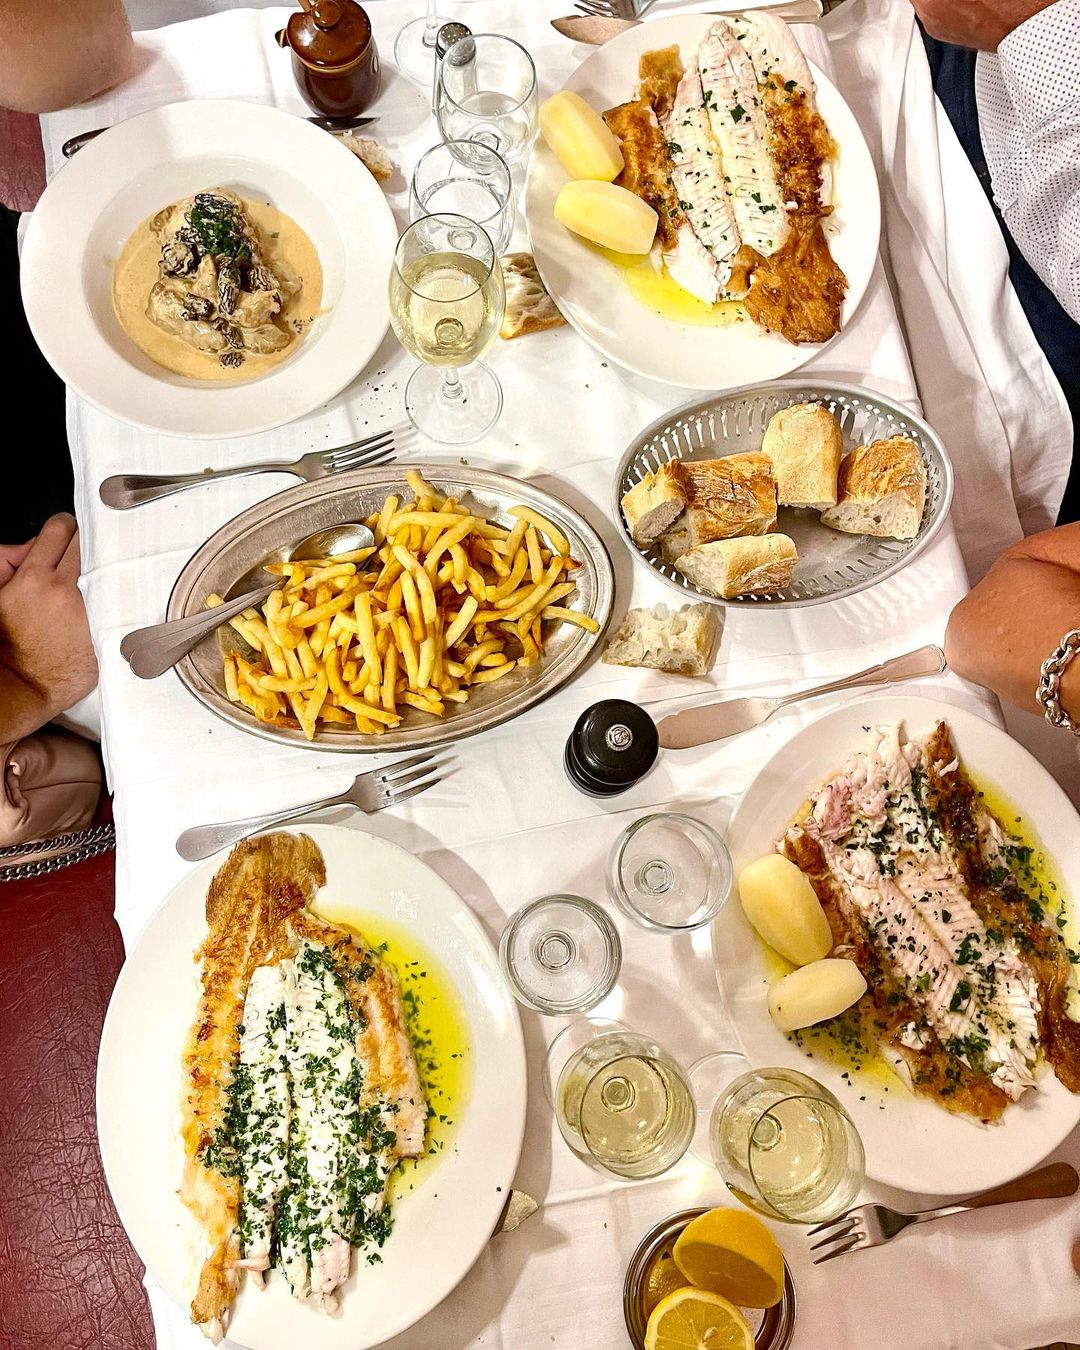 A bird's eye view of Pommes Frites and whole fish dishes at Chez Georges